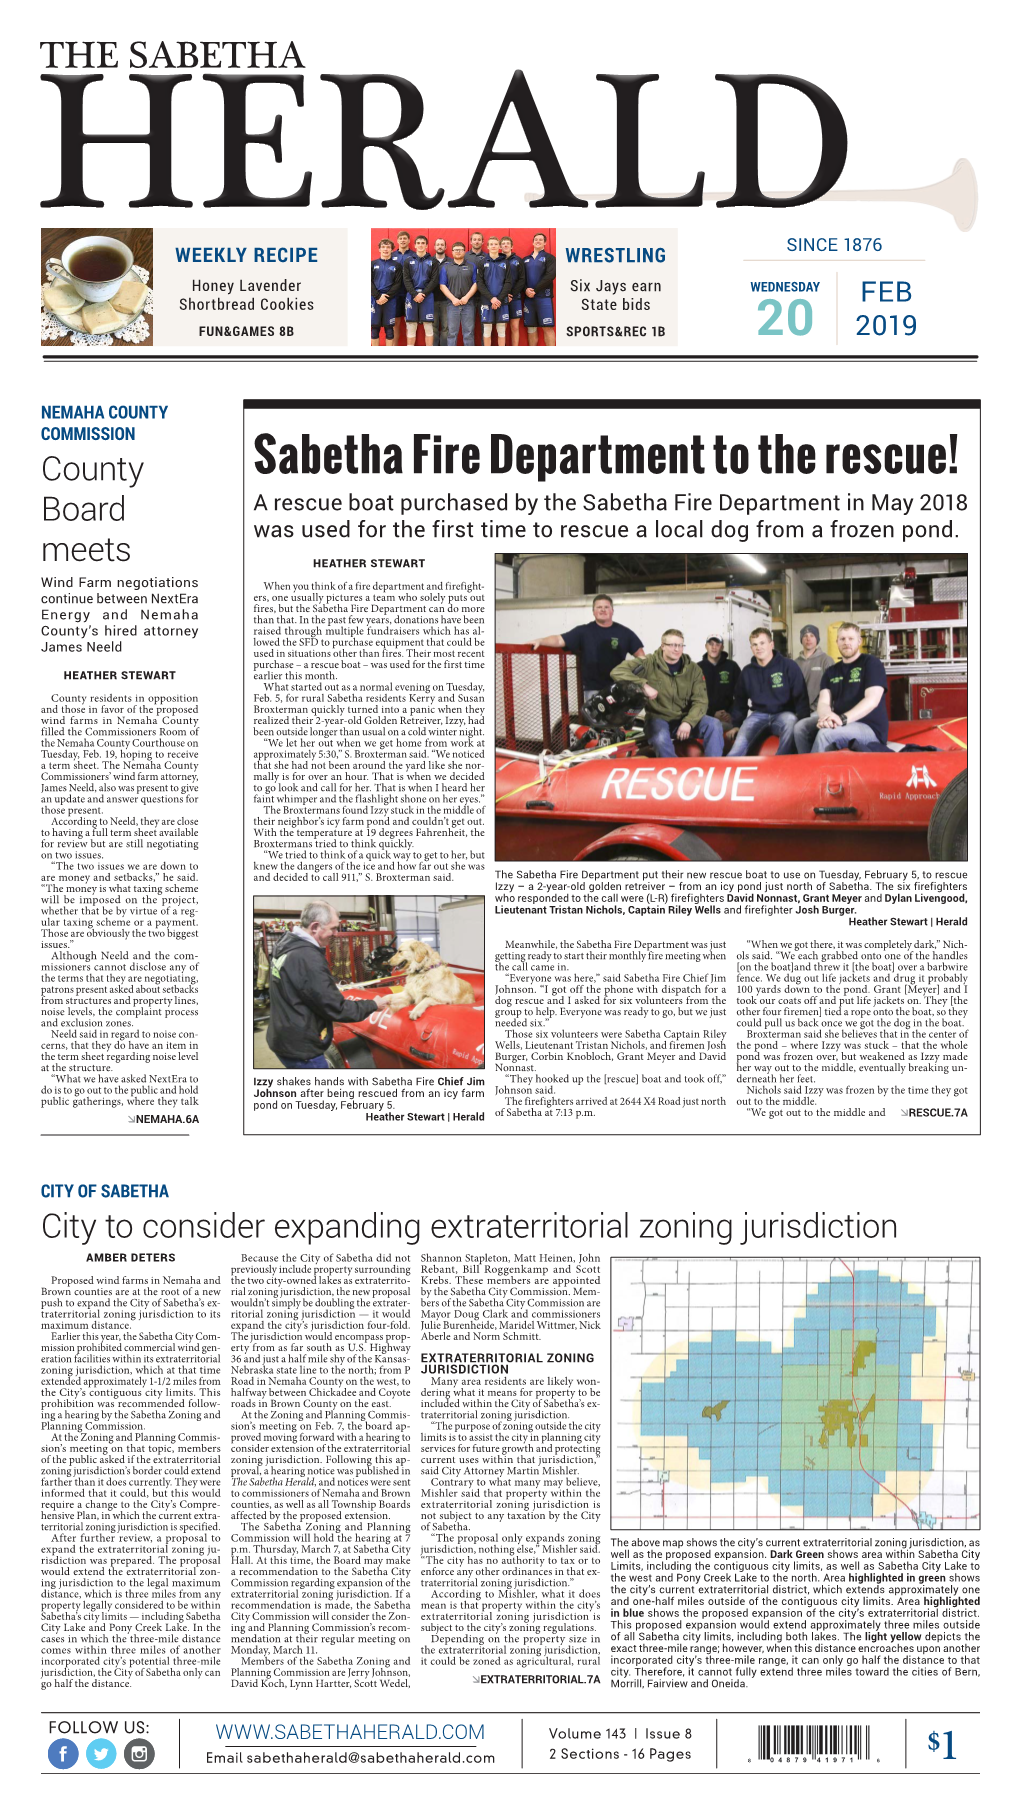 Sabetha Fire Department to the Rescue!